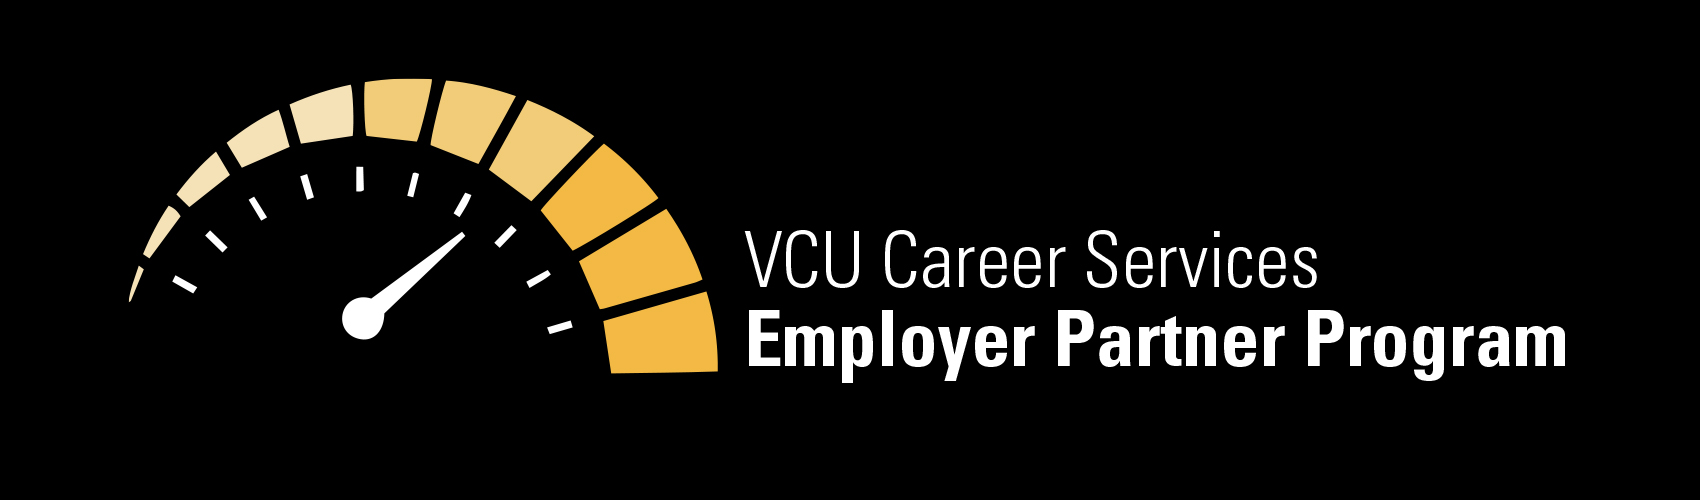 Image that says VCU Career Services Employee Partner Program